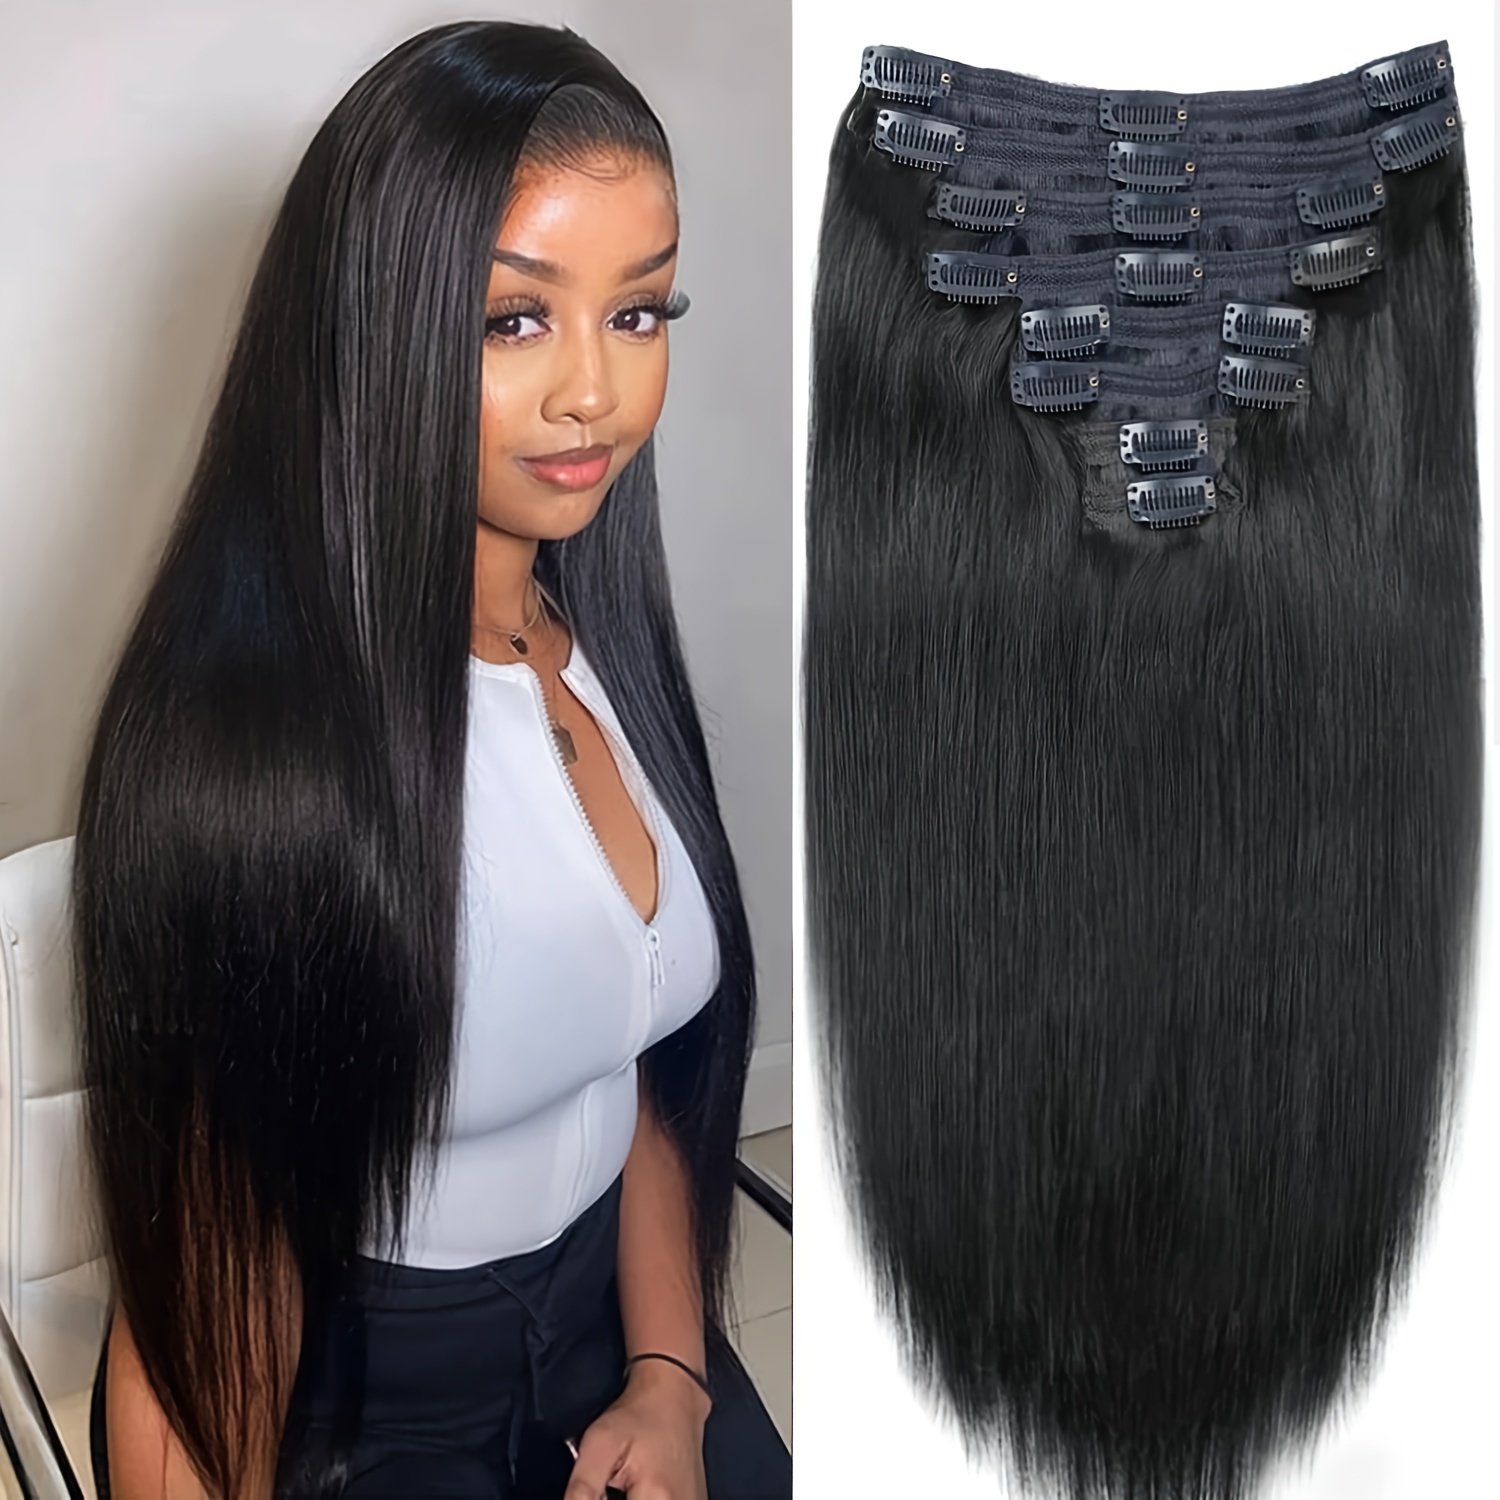 

120g 8pcs/set 100% Remy Human Hair Straight Clip In Hair Extensions - Natural Black Color - 12-24inch Available - Full Head For Women - Long Lasting And Durable Hair Clips Hair Accessories